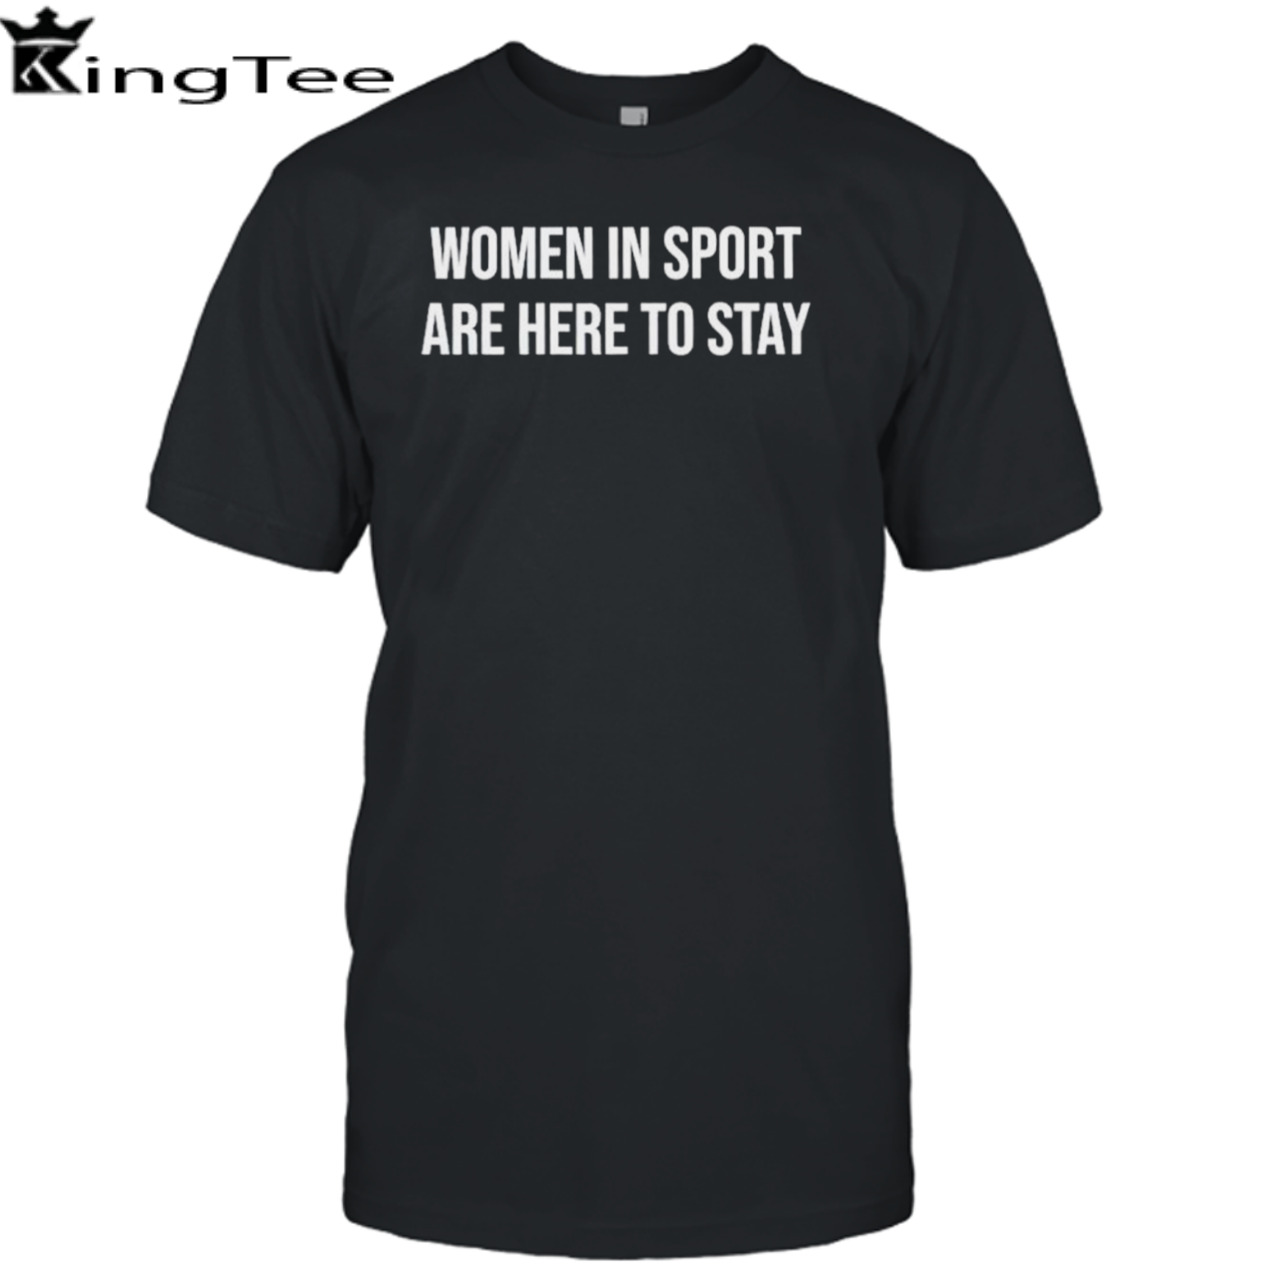 Women in sport are here to stay shirt